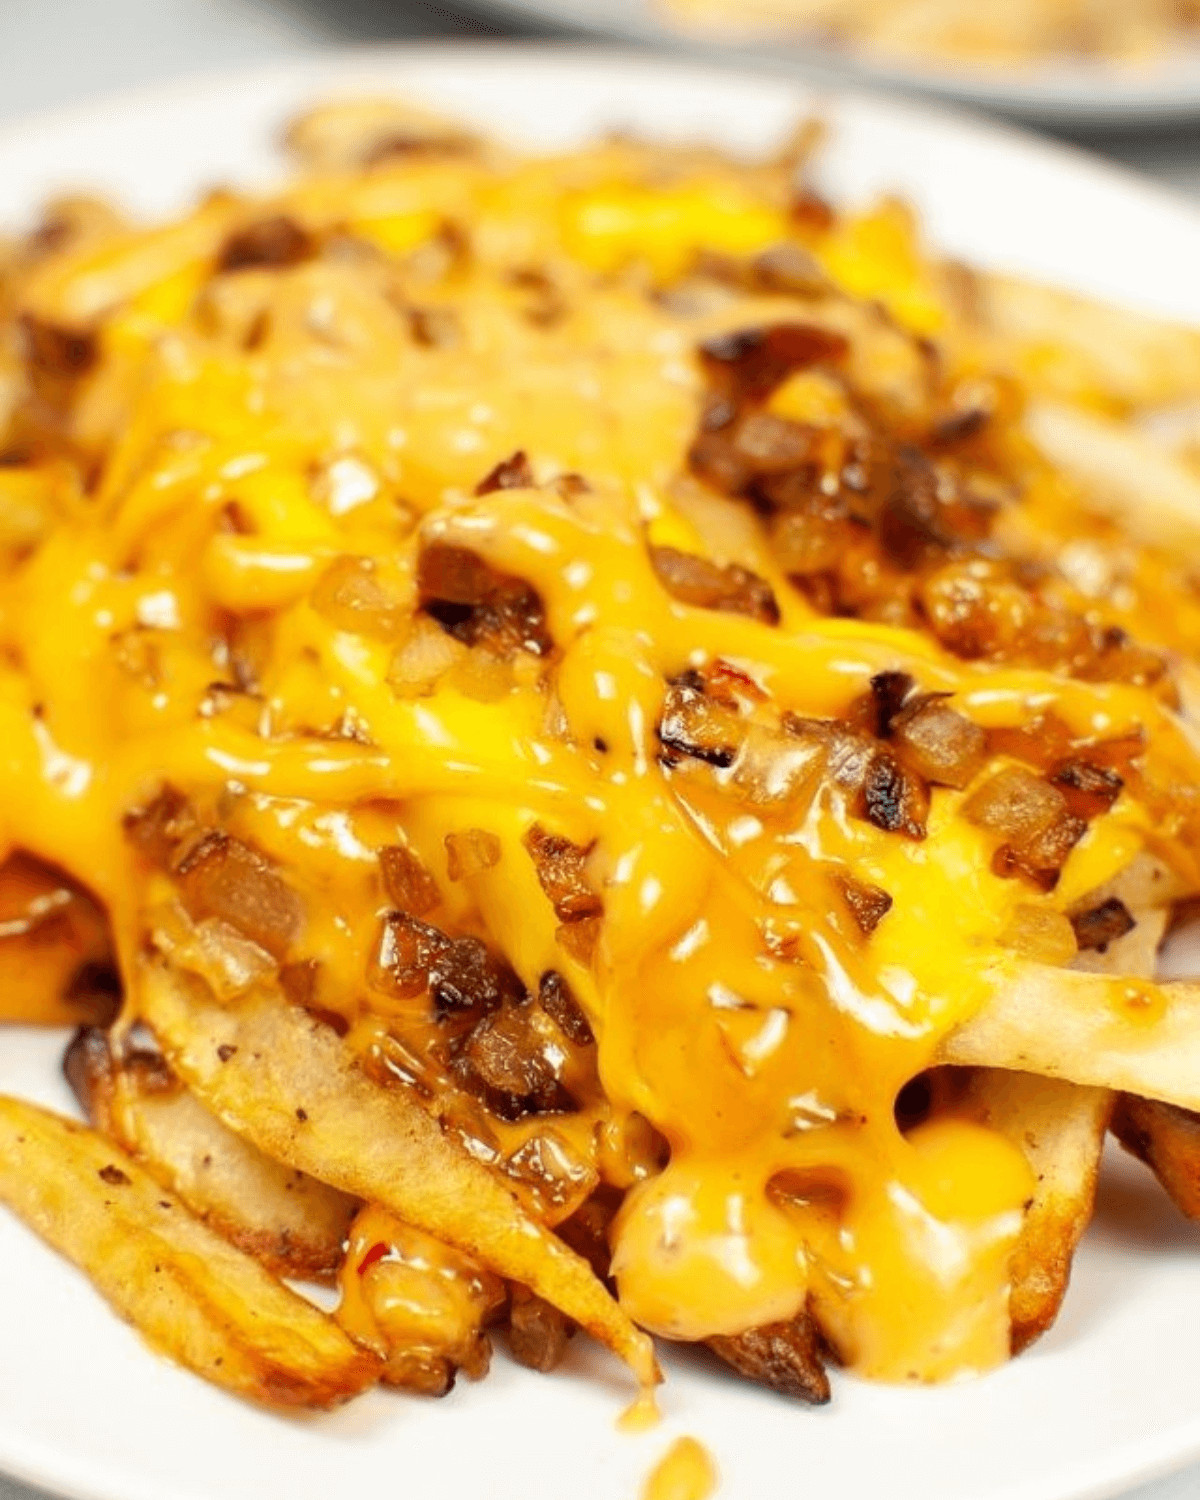 A plate of loaded air fryer animal fries.